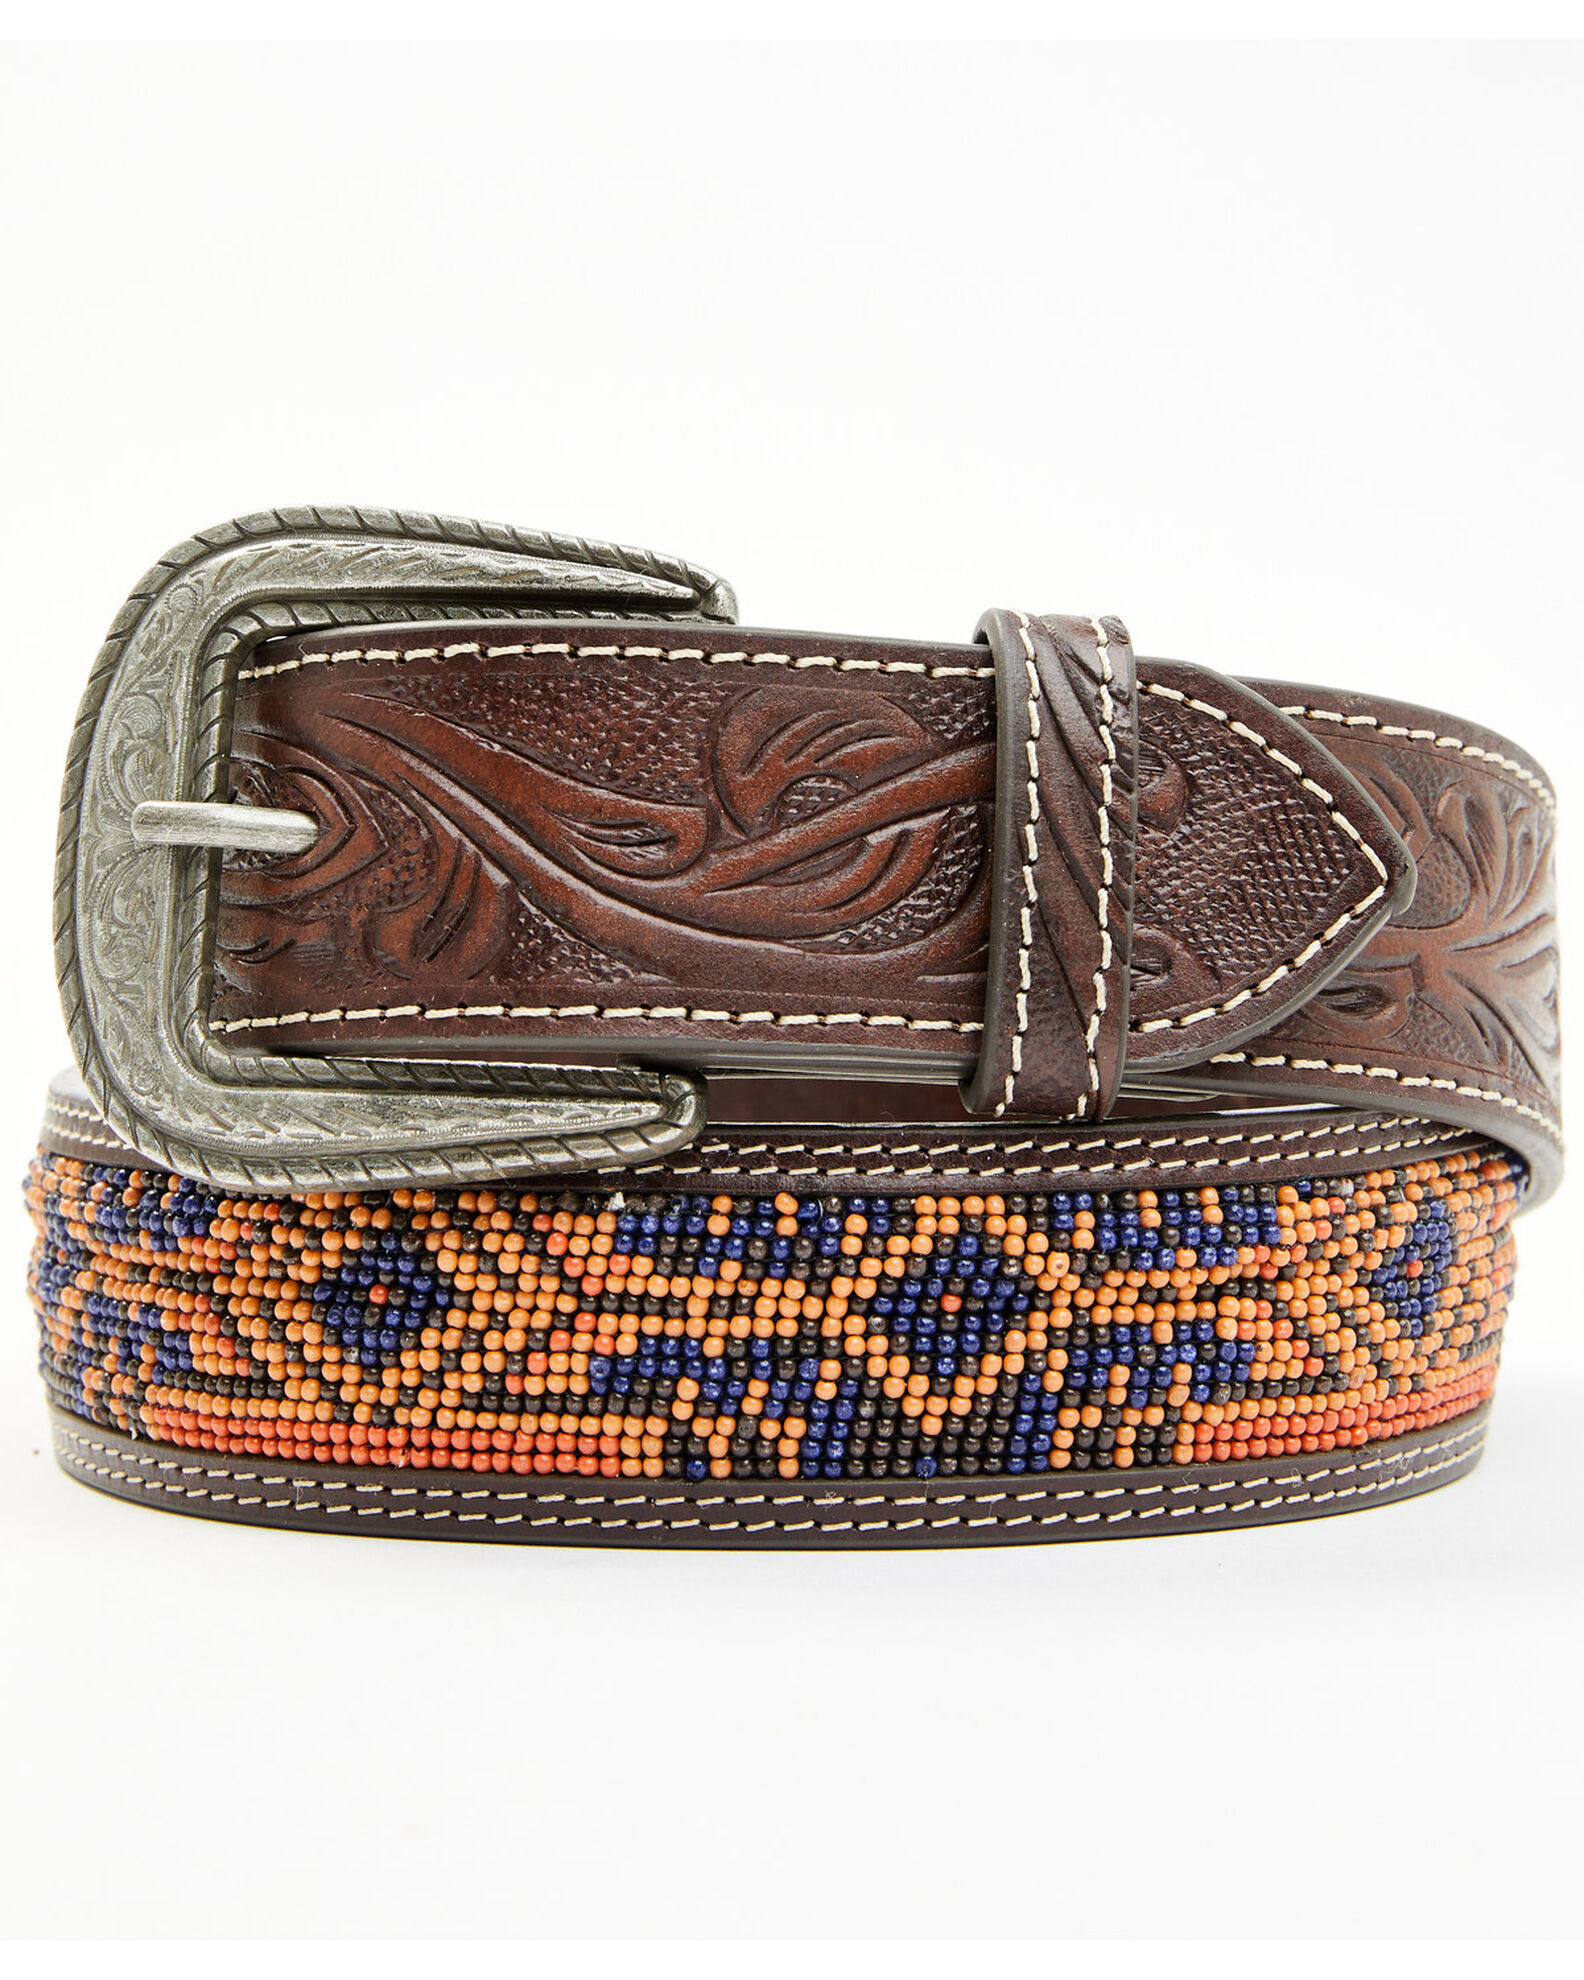 ACCESSORIES :: Classic Belts & Duty Belts :: BOSTON LEATHER - Traditional  1.5 Basketweave Belts with GOLD Buckle